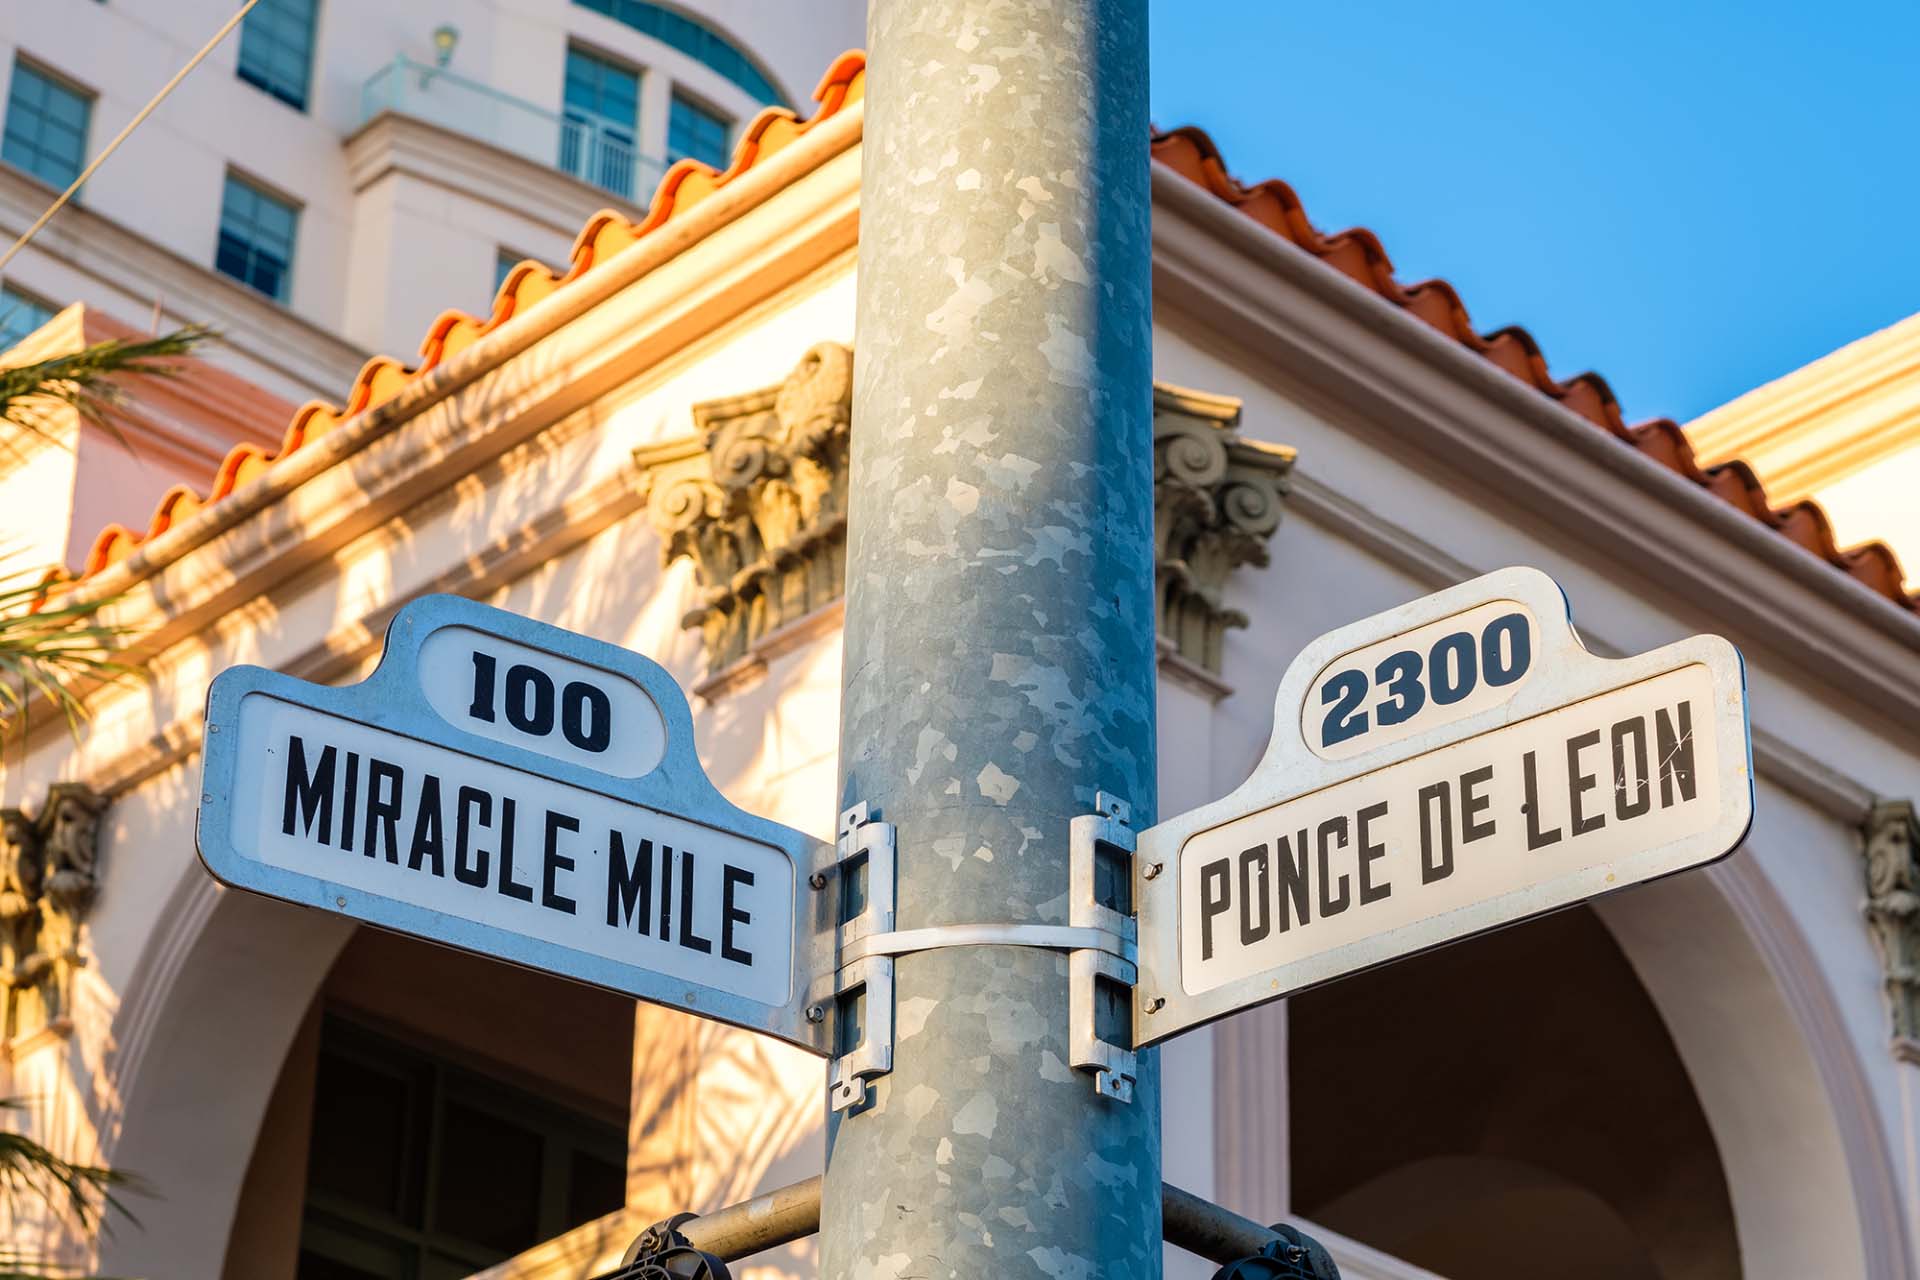 Street Sign of 100 Miracle Mile & 2300 Ponce de Leon